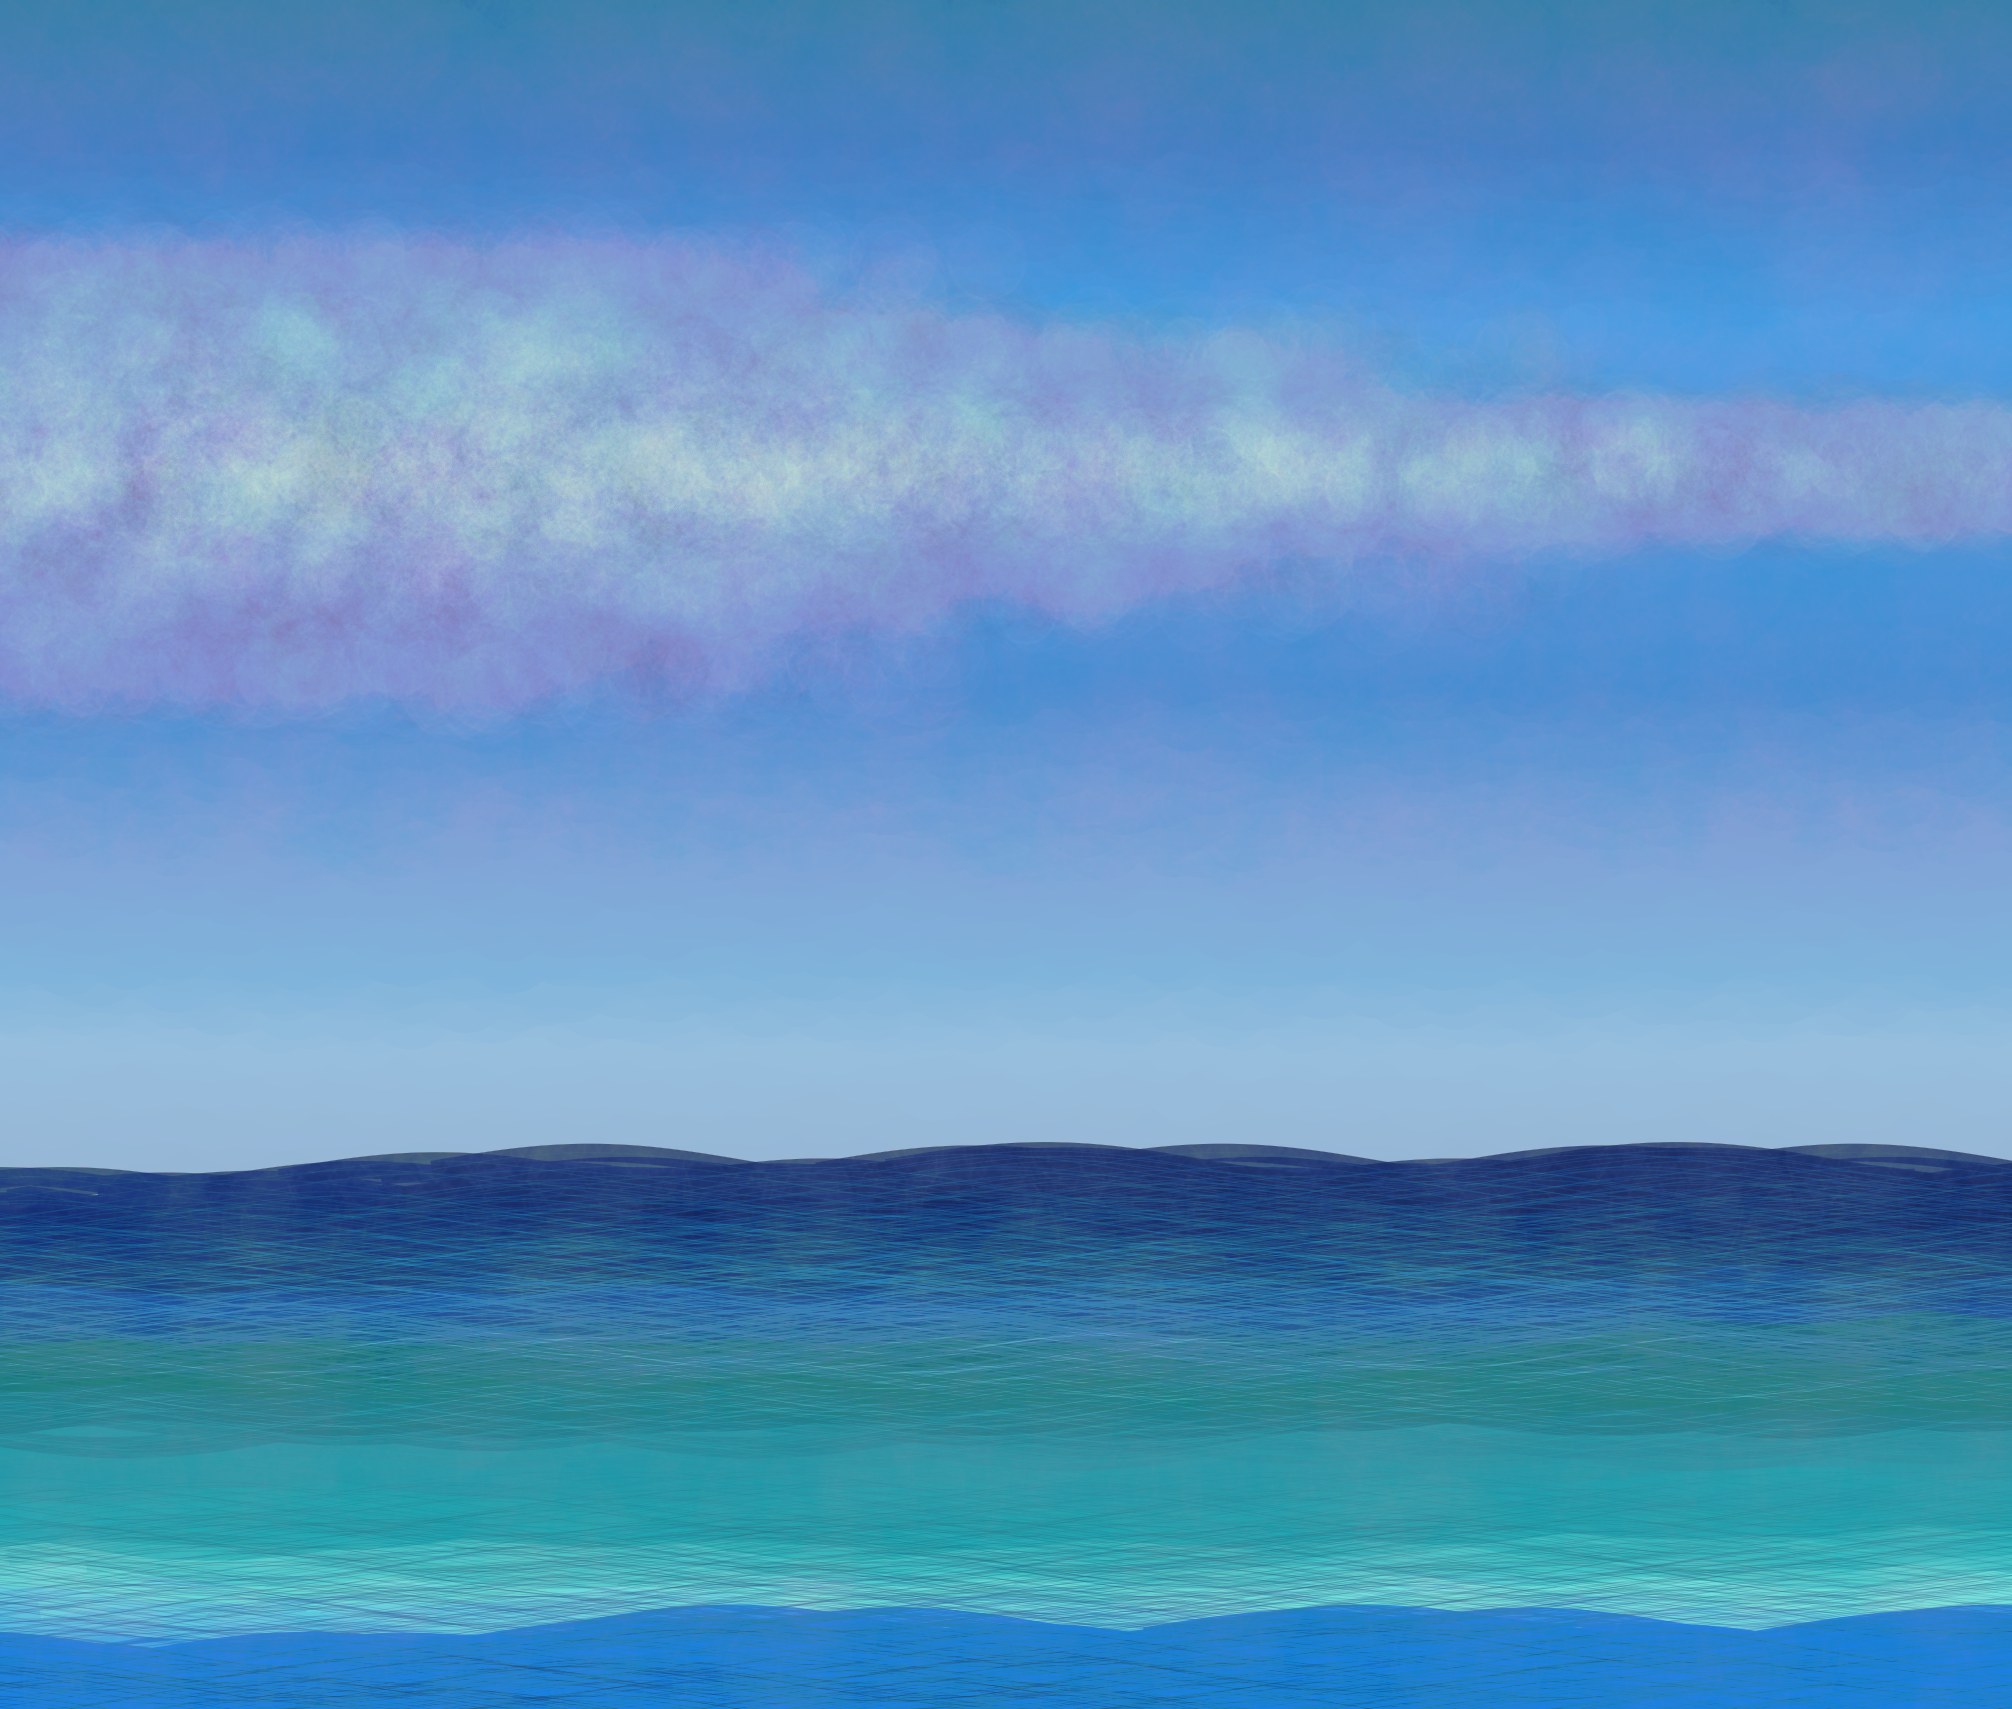 a generated image of an ocean in the daytime, with clouds hovering over it.